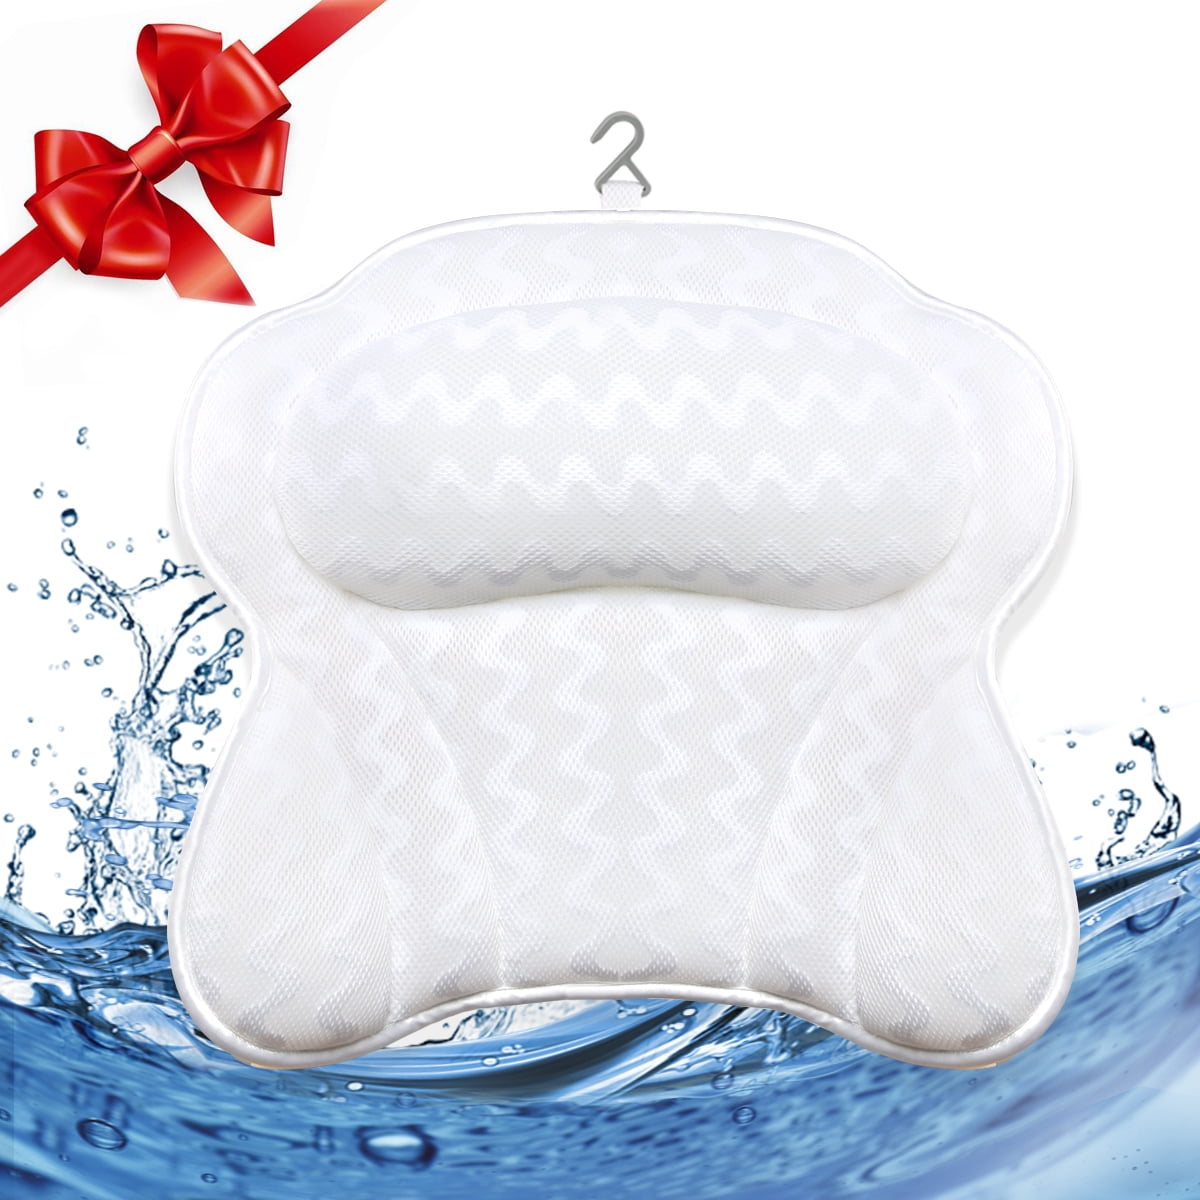 Coastacloud Non-Slip Bathtub Mattress Cushion with Large Suction Cups, Full Body Spa Bath Pillow Mat, Comfort Support Your Head, Neck, Shoulder, Back and Tailbone